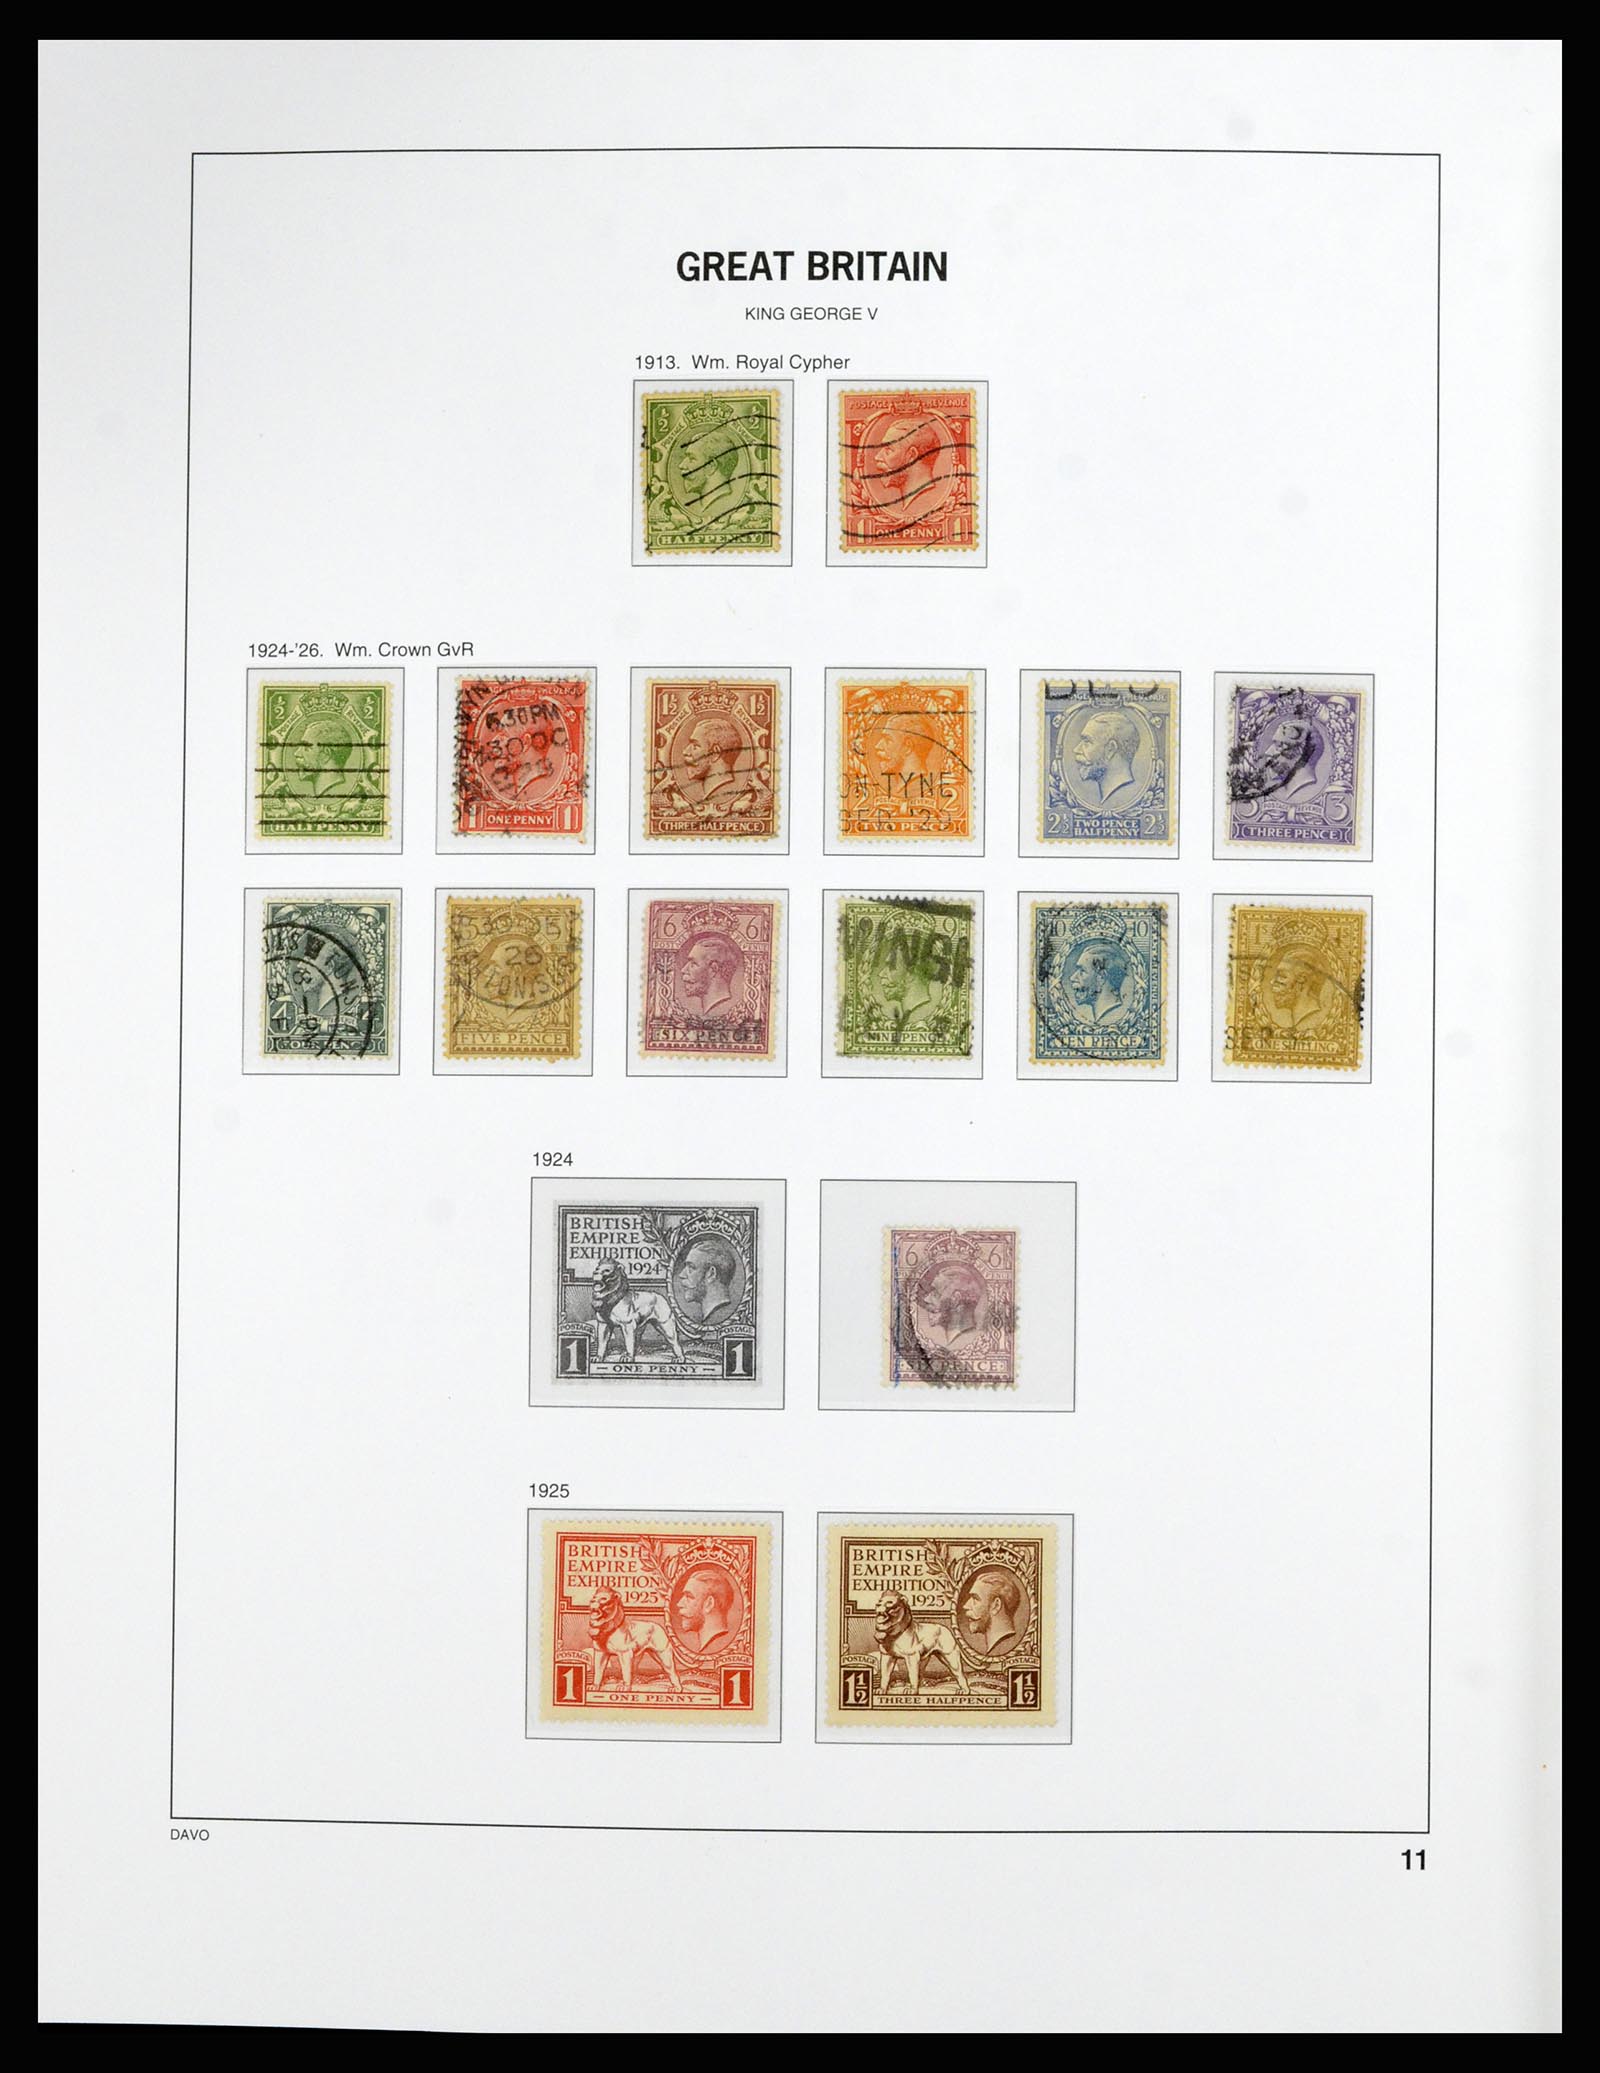 36788 011 - Stamp collection 36788 Great Britain 1840-2002.